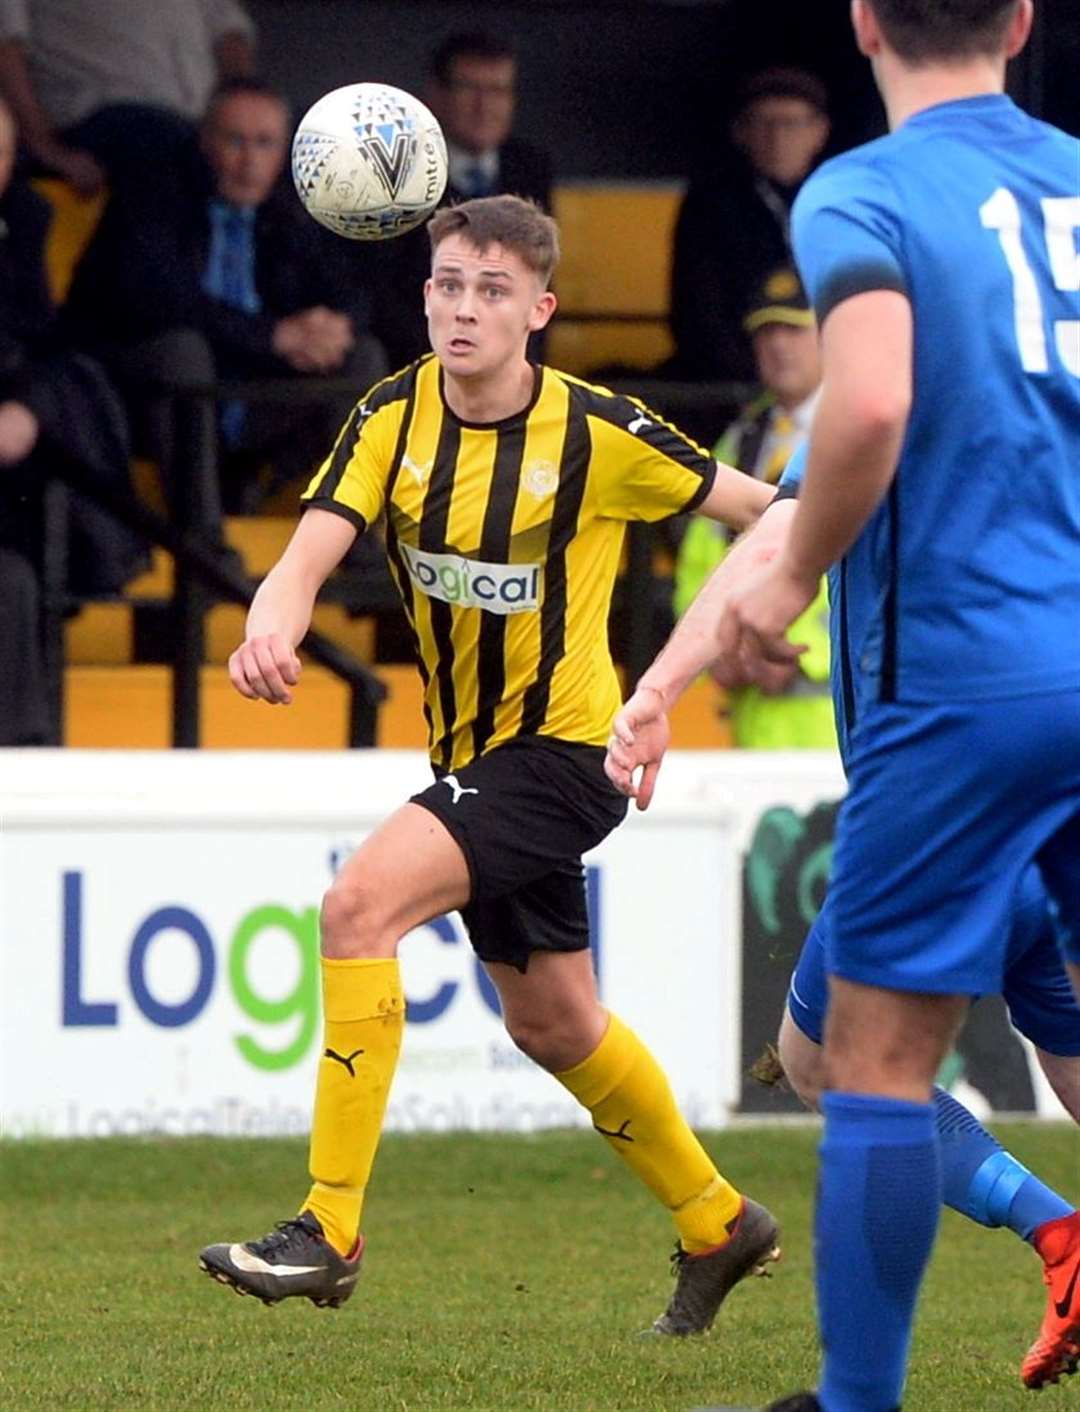 Nairn County will forgo their usual yellow and black stripes in favour of a kit to mark 100 years of playing in the Highland League – which even the players have not seen yet.